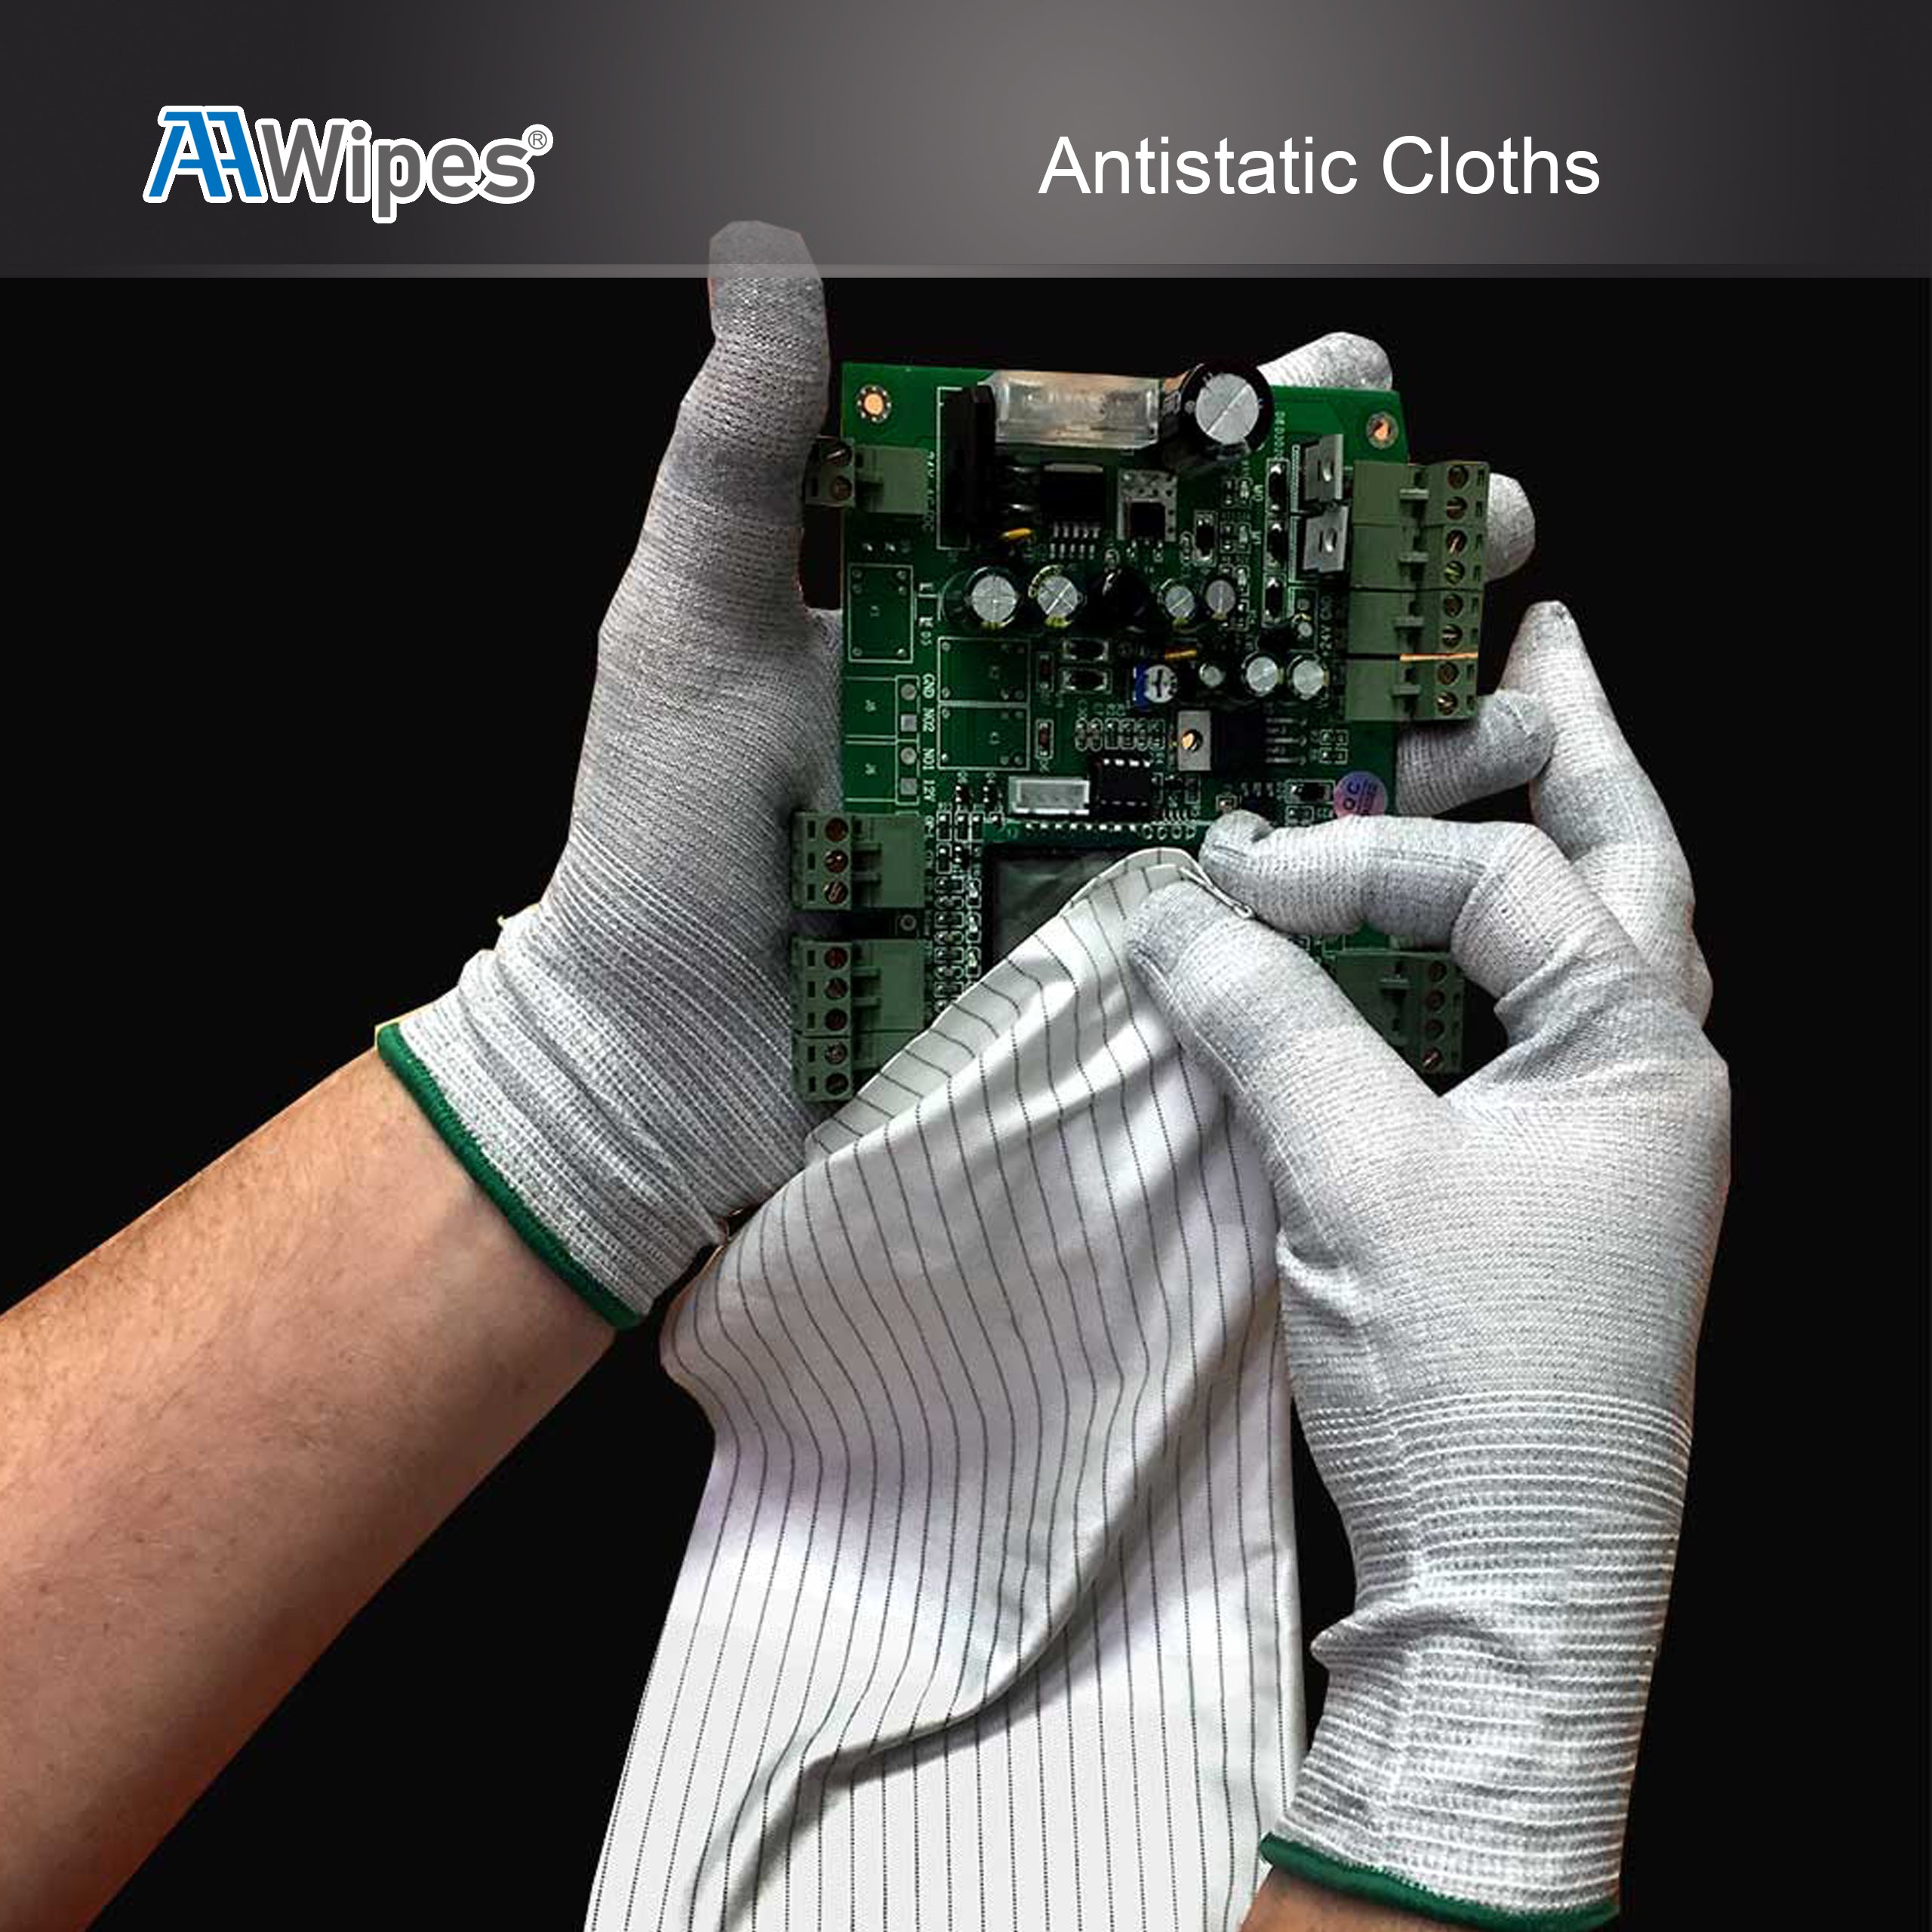 Electronics Wipes Anti-Static Cleanroom Cloths Premium Polyester Wipers for for Lab, Electronics, Pharmaceutical, Printing and Semiconductor Industries 4,000 Wipes/Box, 10 Bags (No. CE16004).